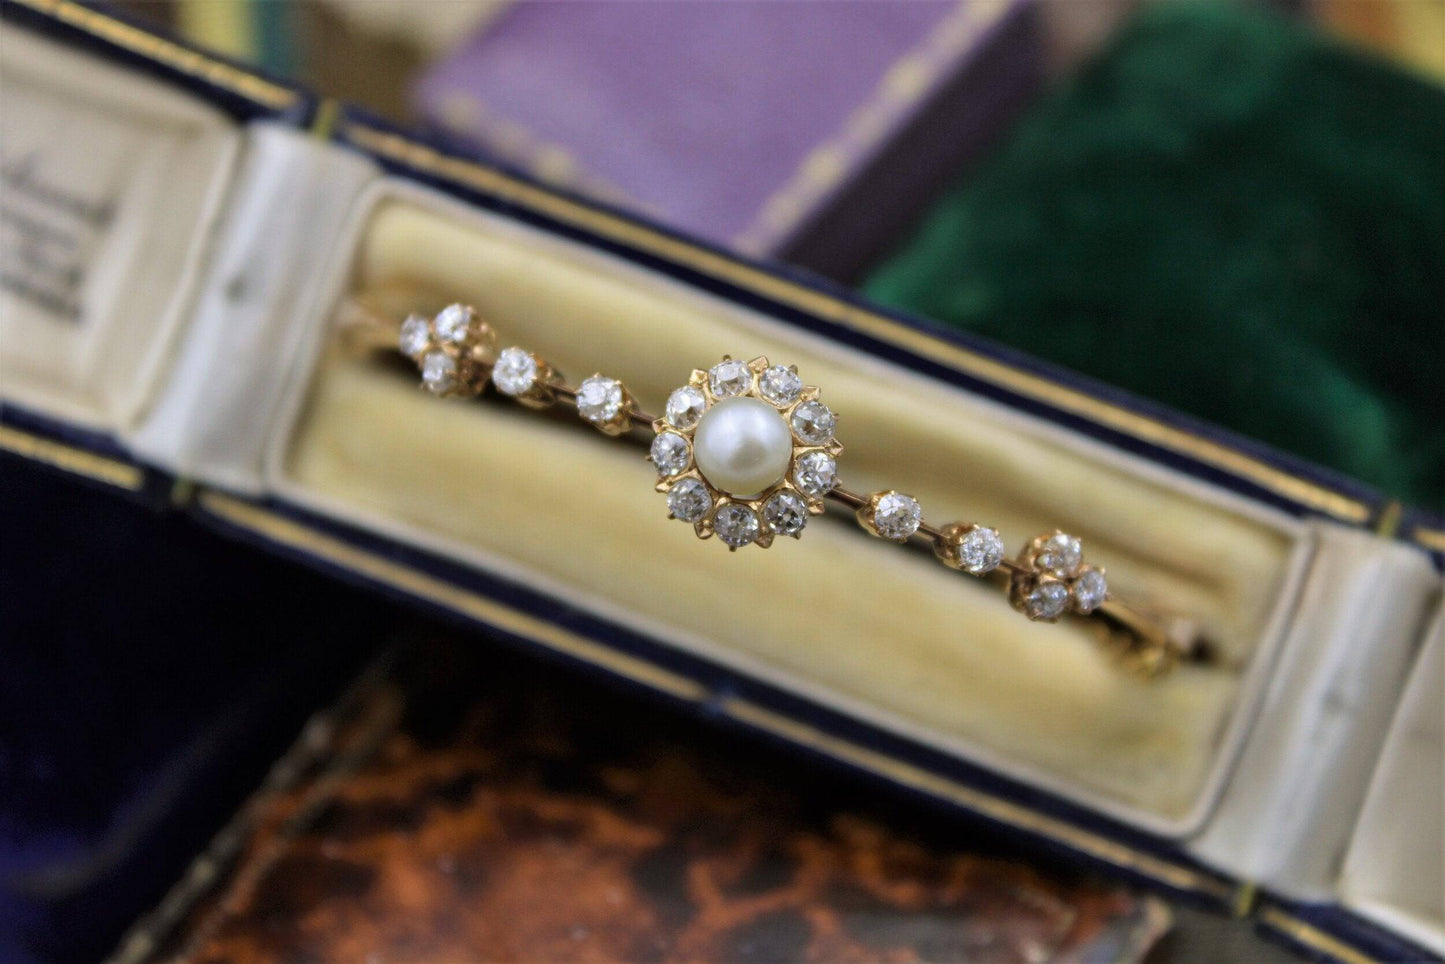 A very fine Victorian Natural Pearl & Diamond Cluster Bangle set in High Carat Yellow Gold, English, Circa 1900 - Robin Haydock Antiques